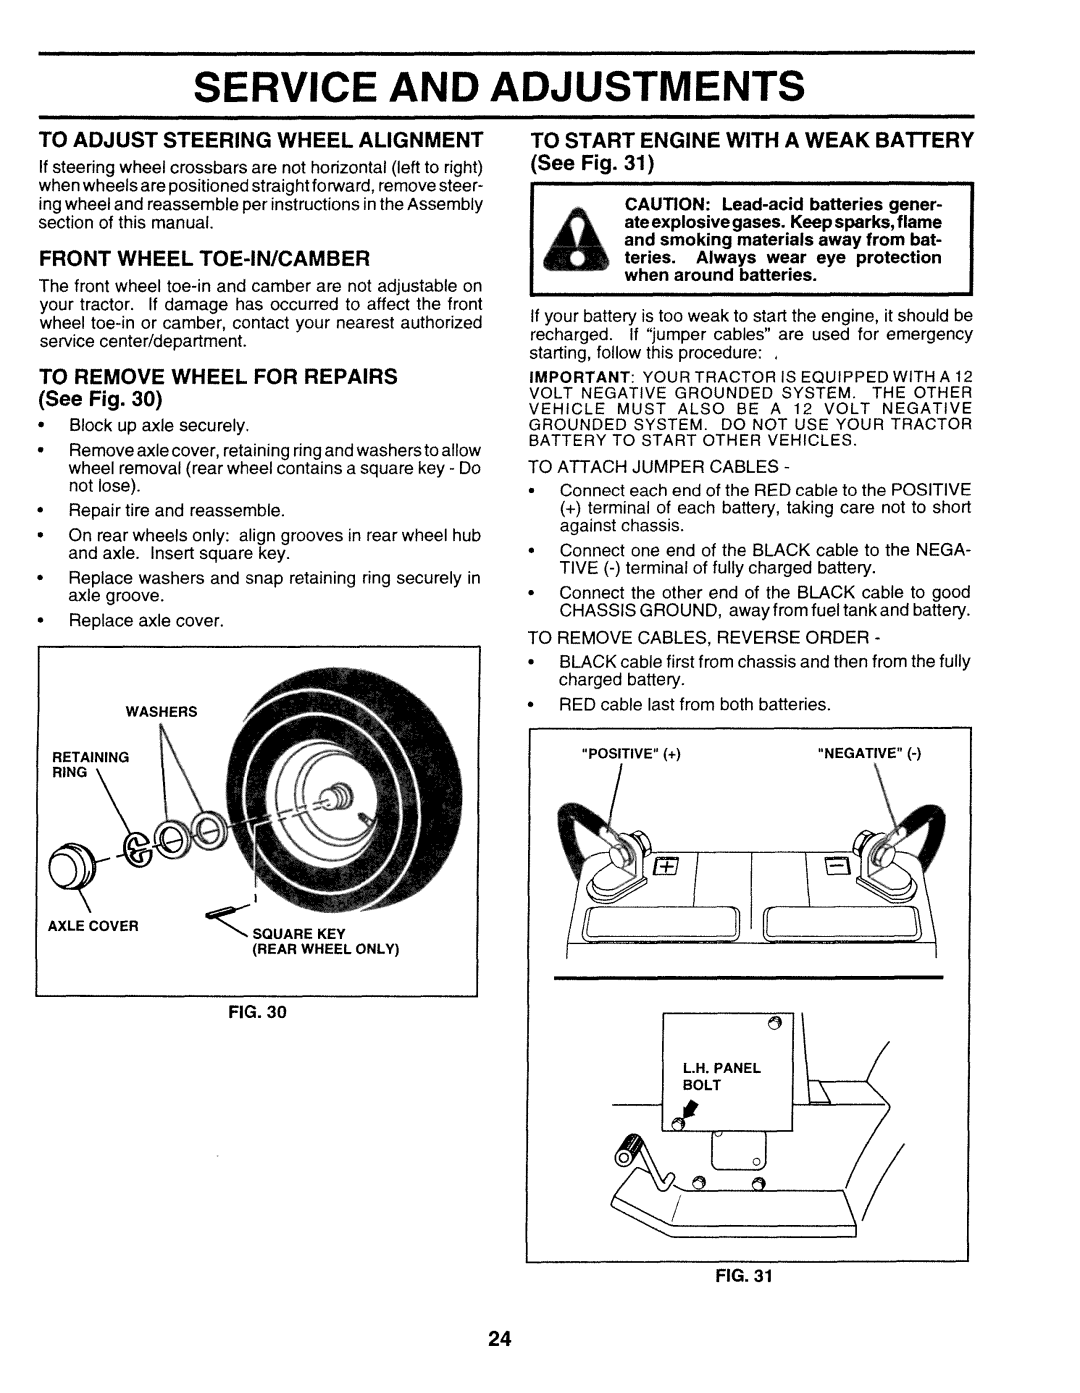 Sears 917.25271 Service And Adjustments, See Fig, To Adjust Steering Wheel Alignment, Front Wheel Toe-In/Camber 